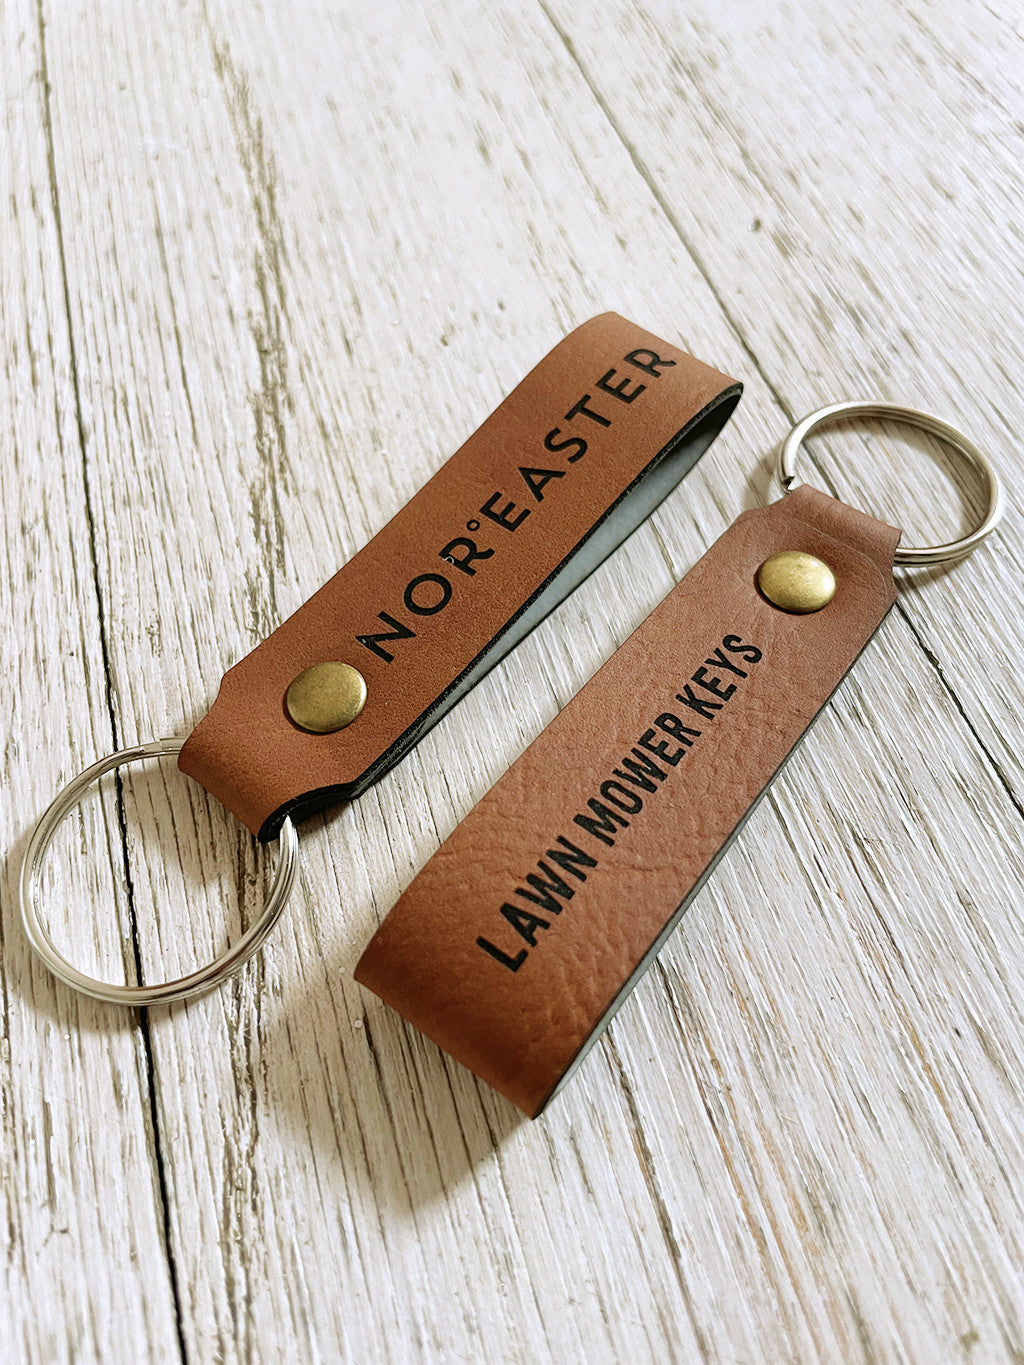 Nor'easter Lawn Mower Keychains